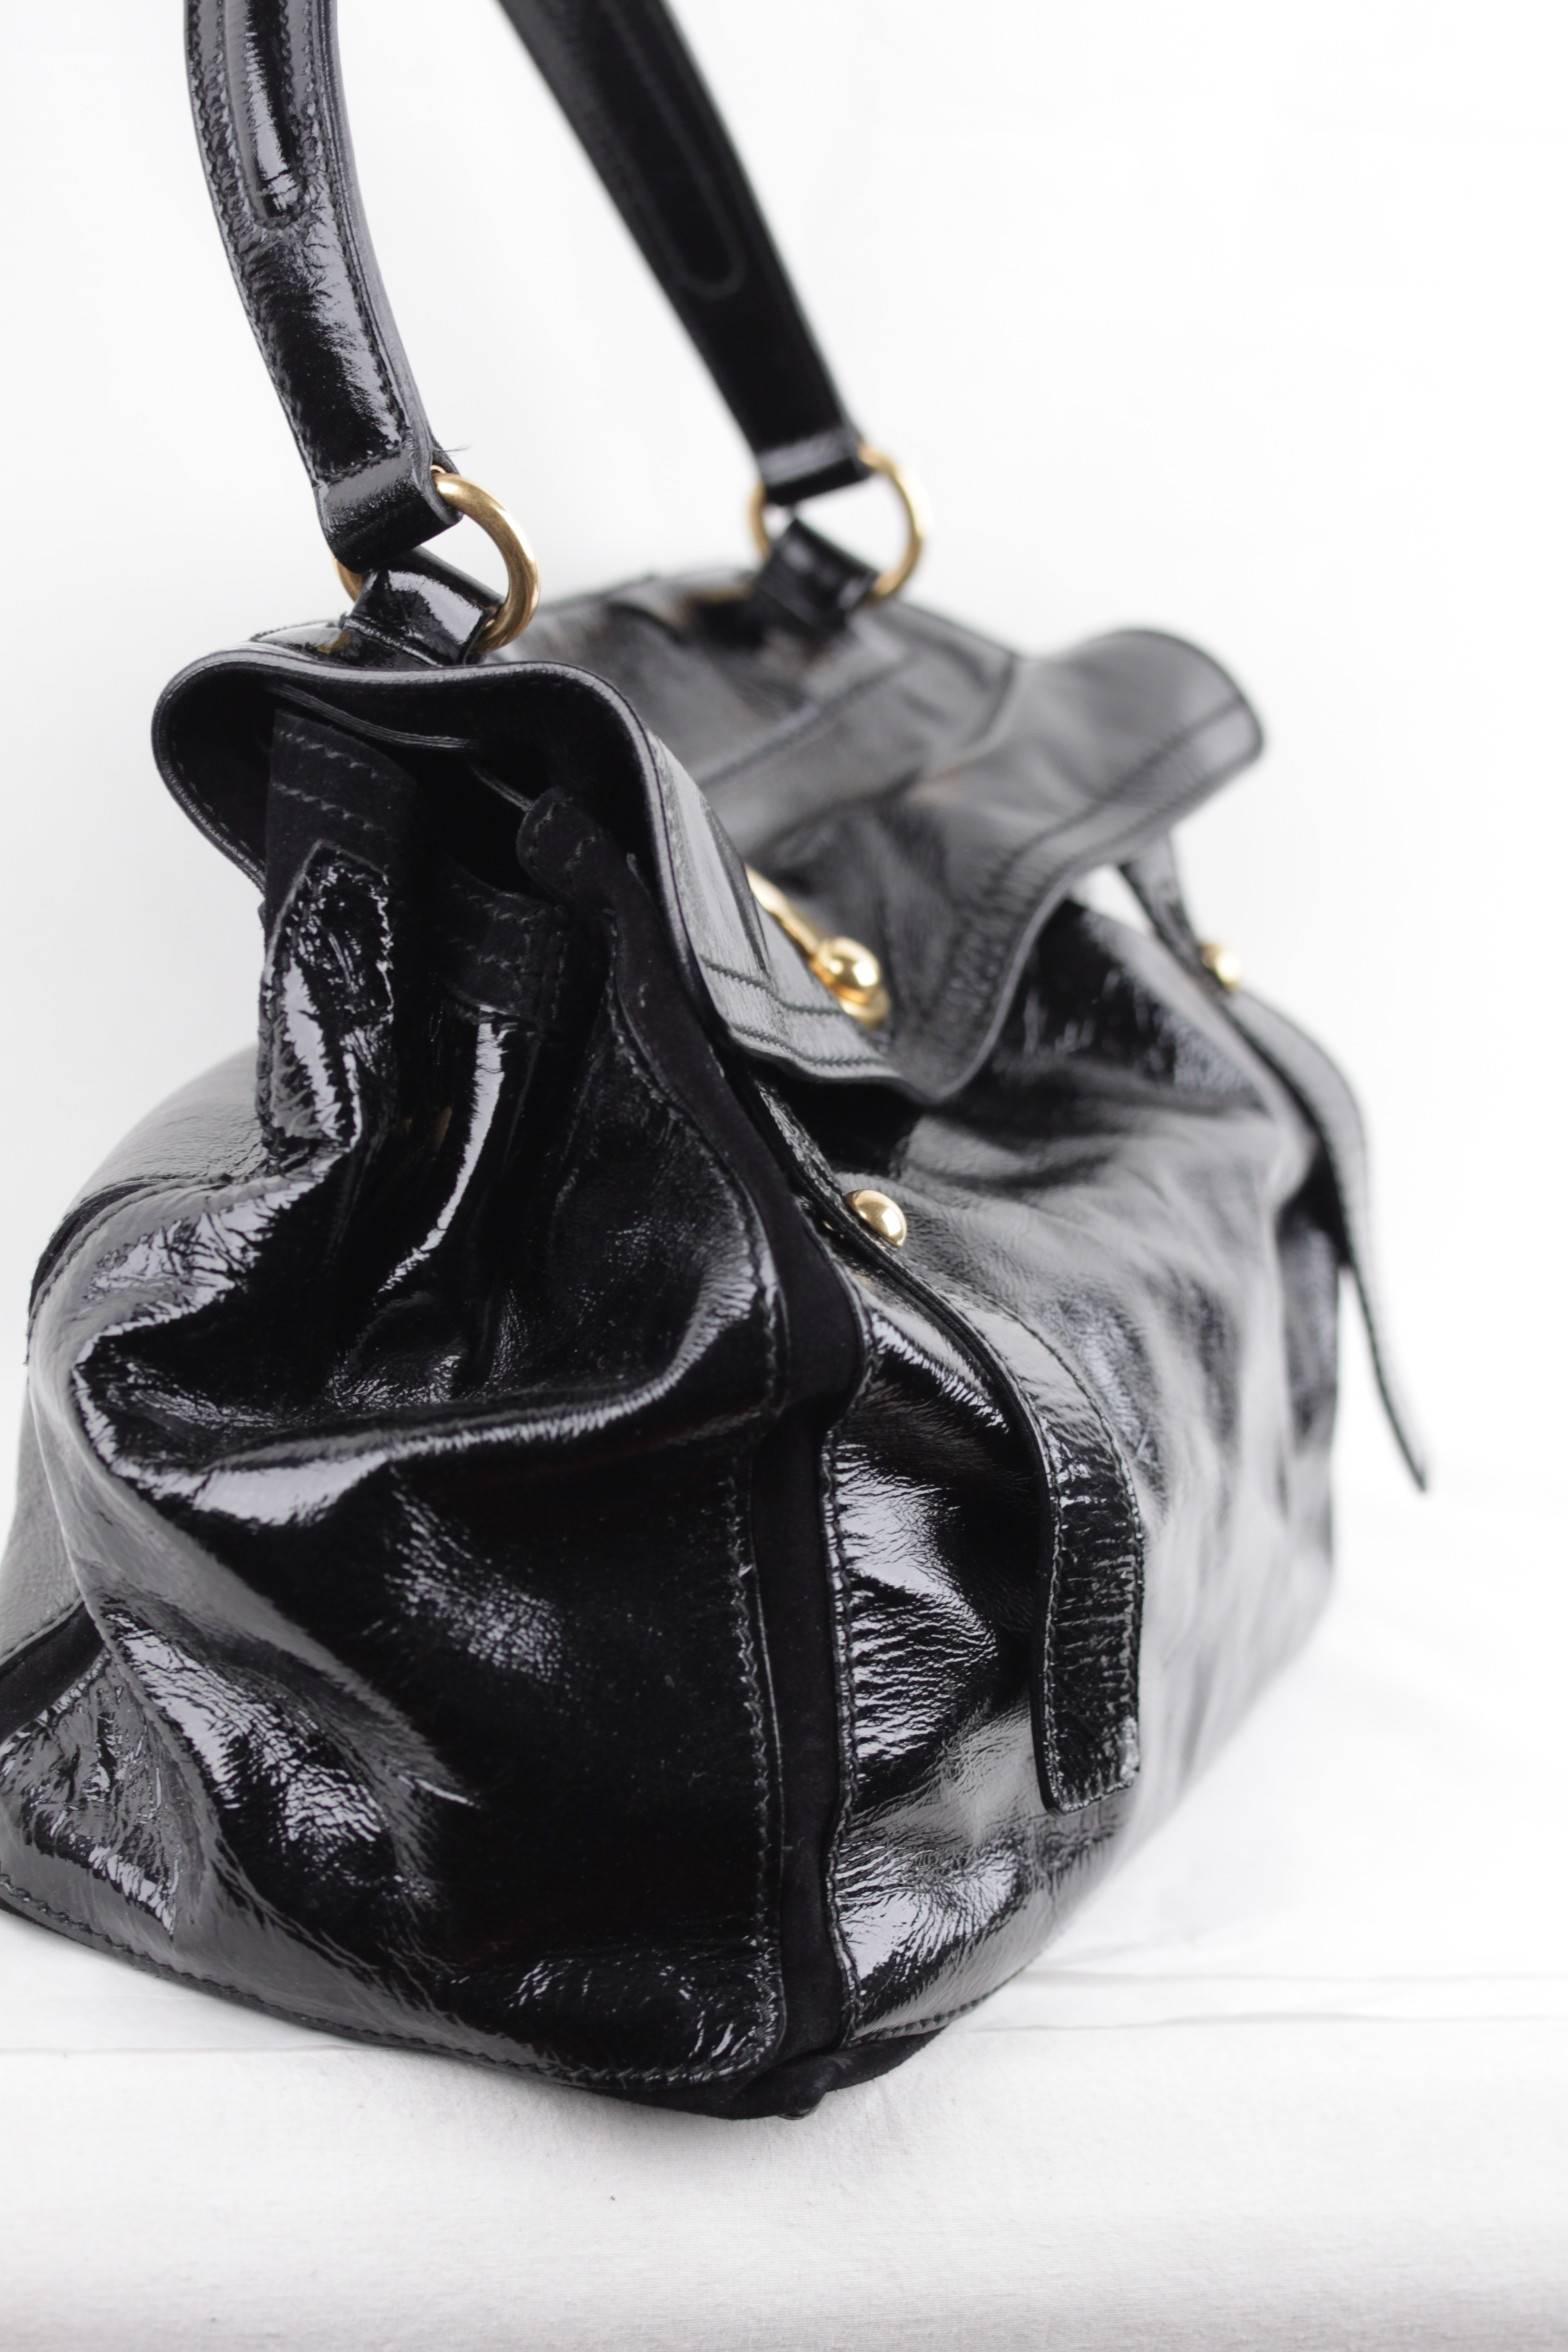 - Black patent leather
- Golden hardware
- Satchel shape
- Lined in black suede with interior pocket
- Interior center zip pocket
- Single handle
- Rear compartment and 4 protective bottom feet
- Approx.meauserements: 10 x 14 x 6 inches -